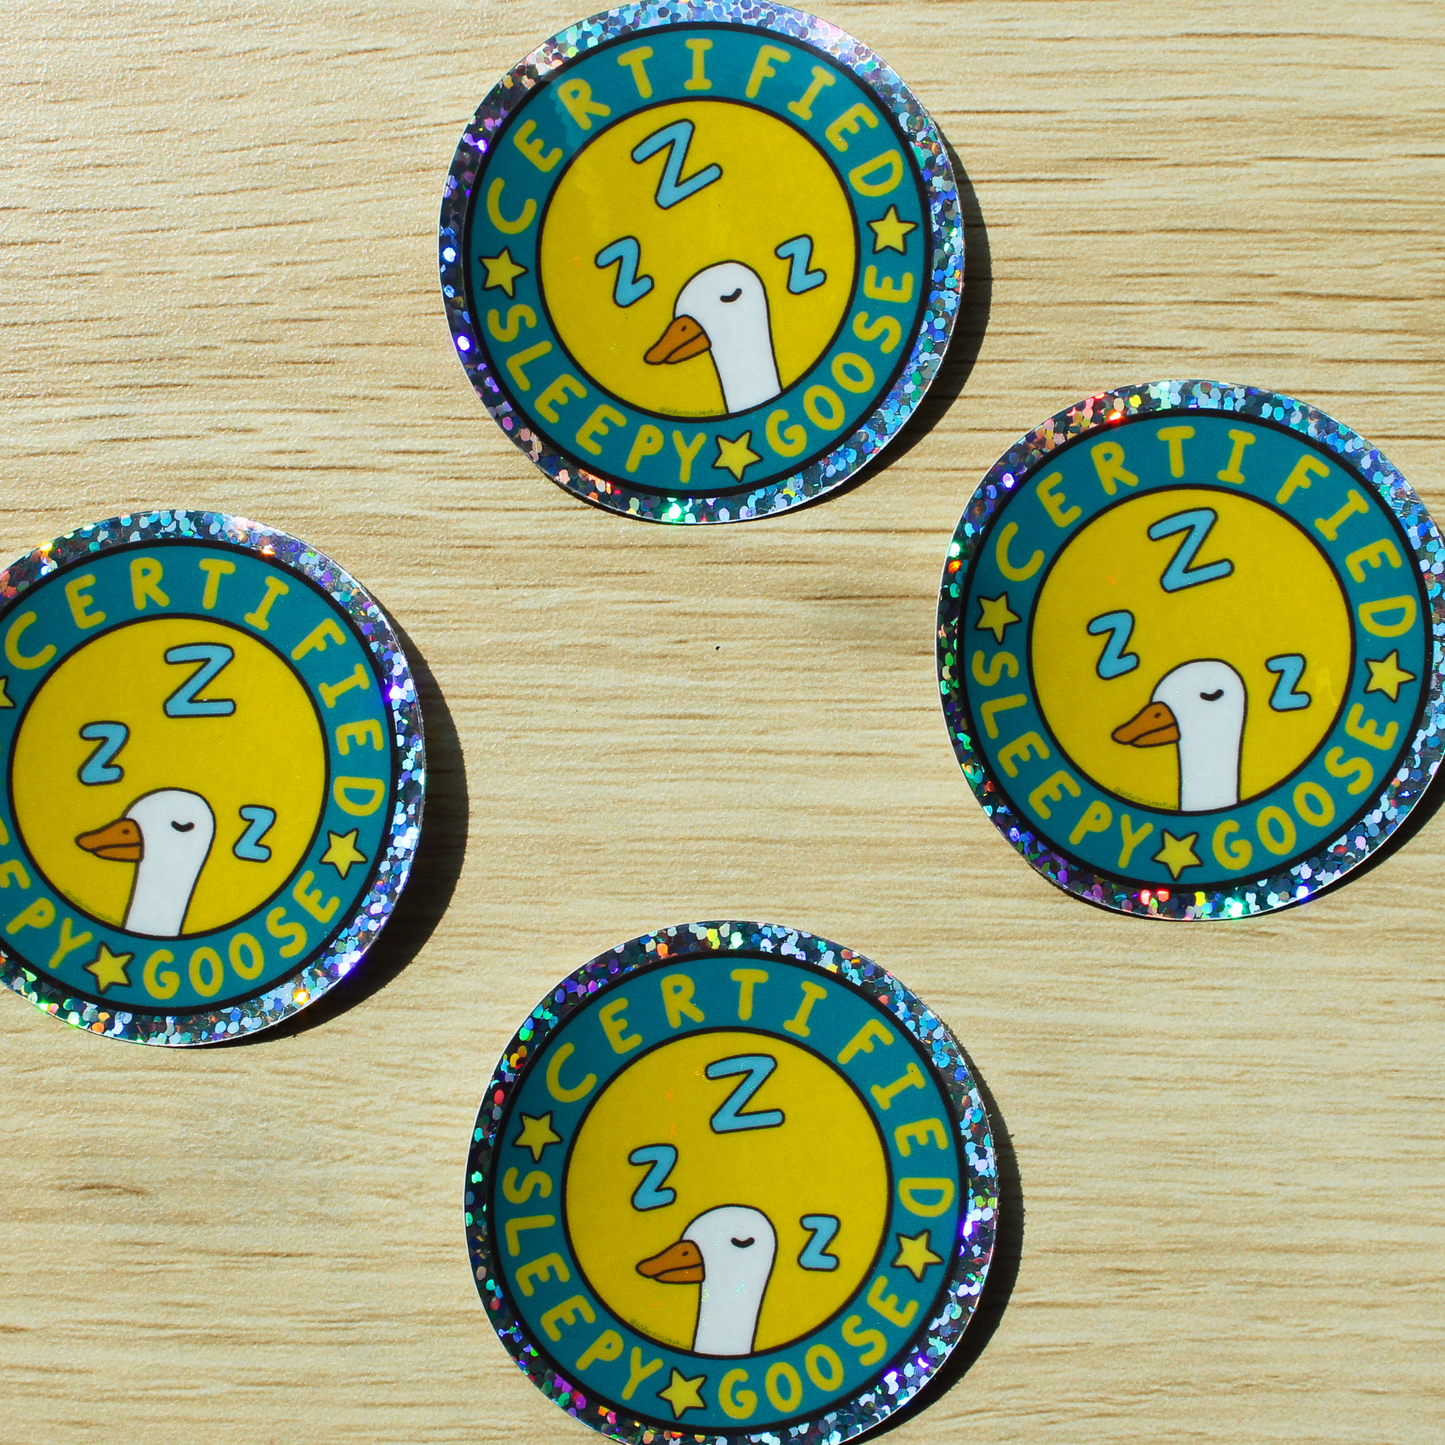 Four certified sleepy goose holographic circle stickers placed on a wooden background